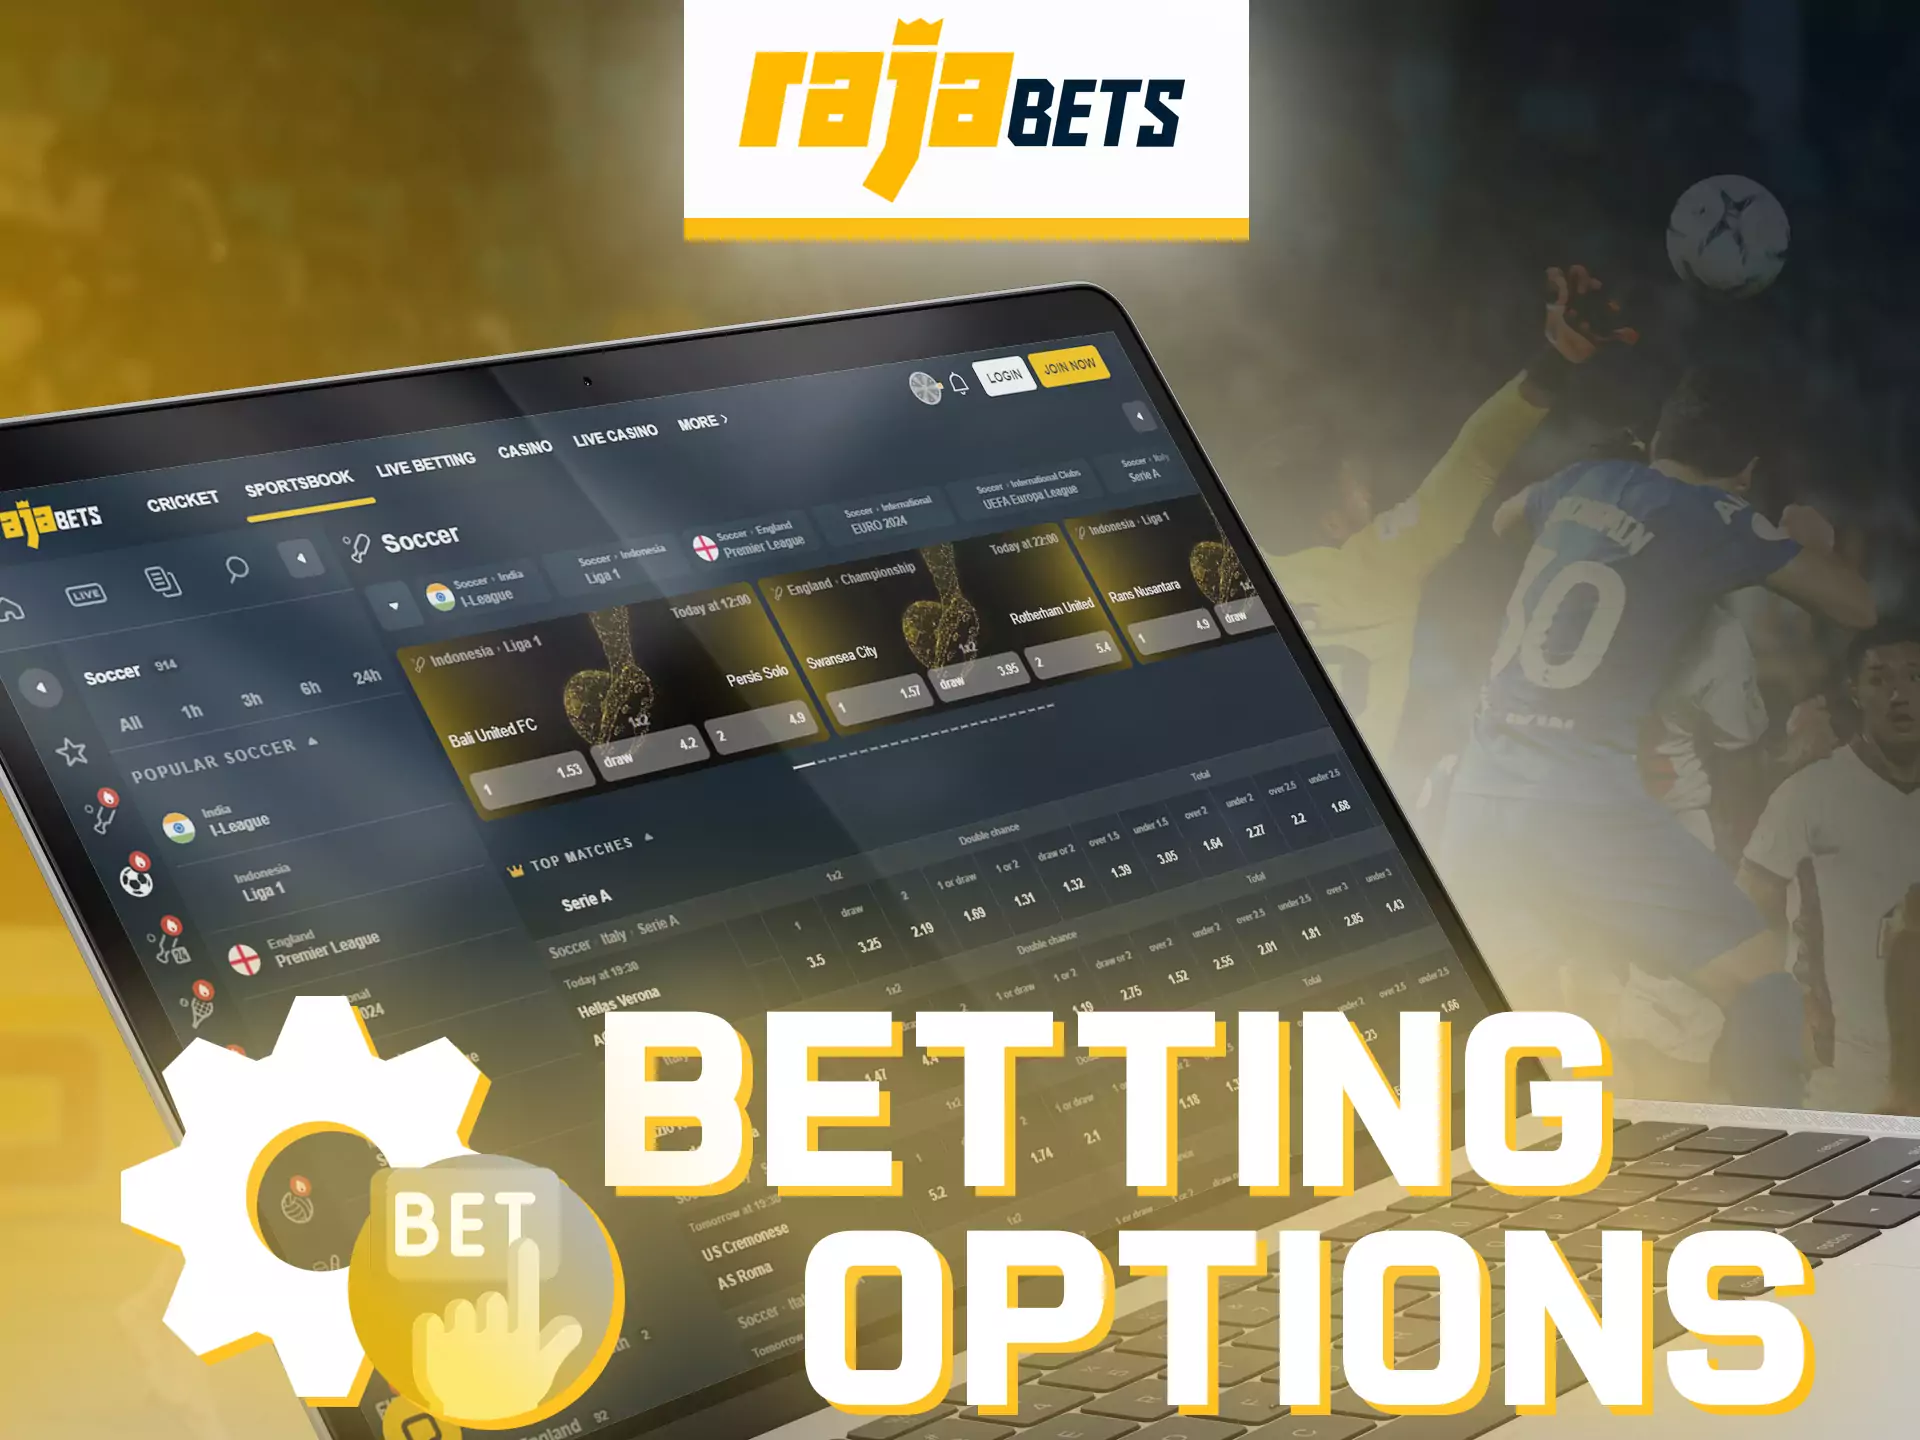 At Rajabets, try different options for sports betting.